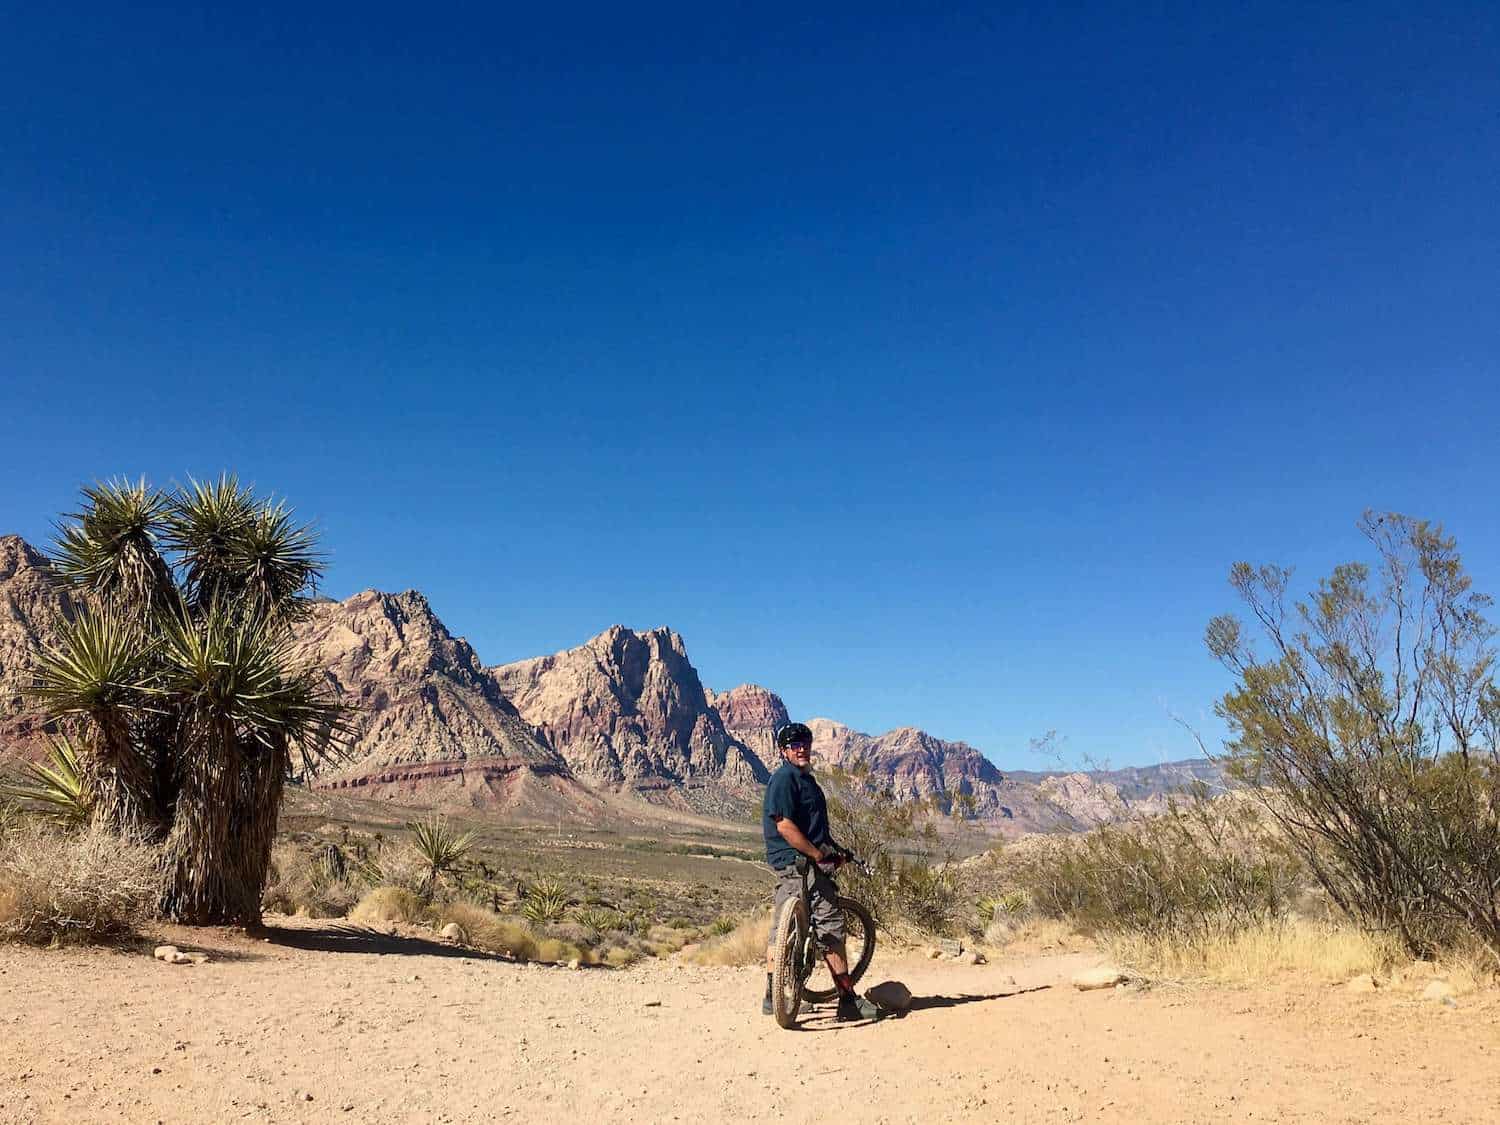 Male mountain biker on trails in Las Vegas, Nevada with red rock canyon in background